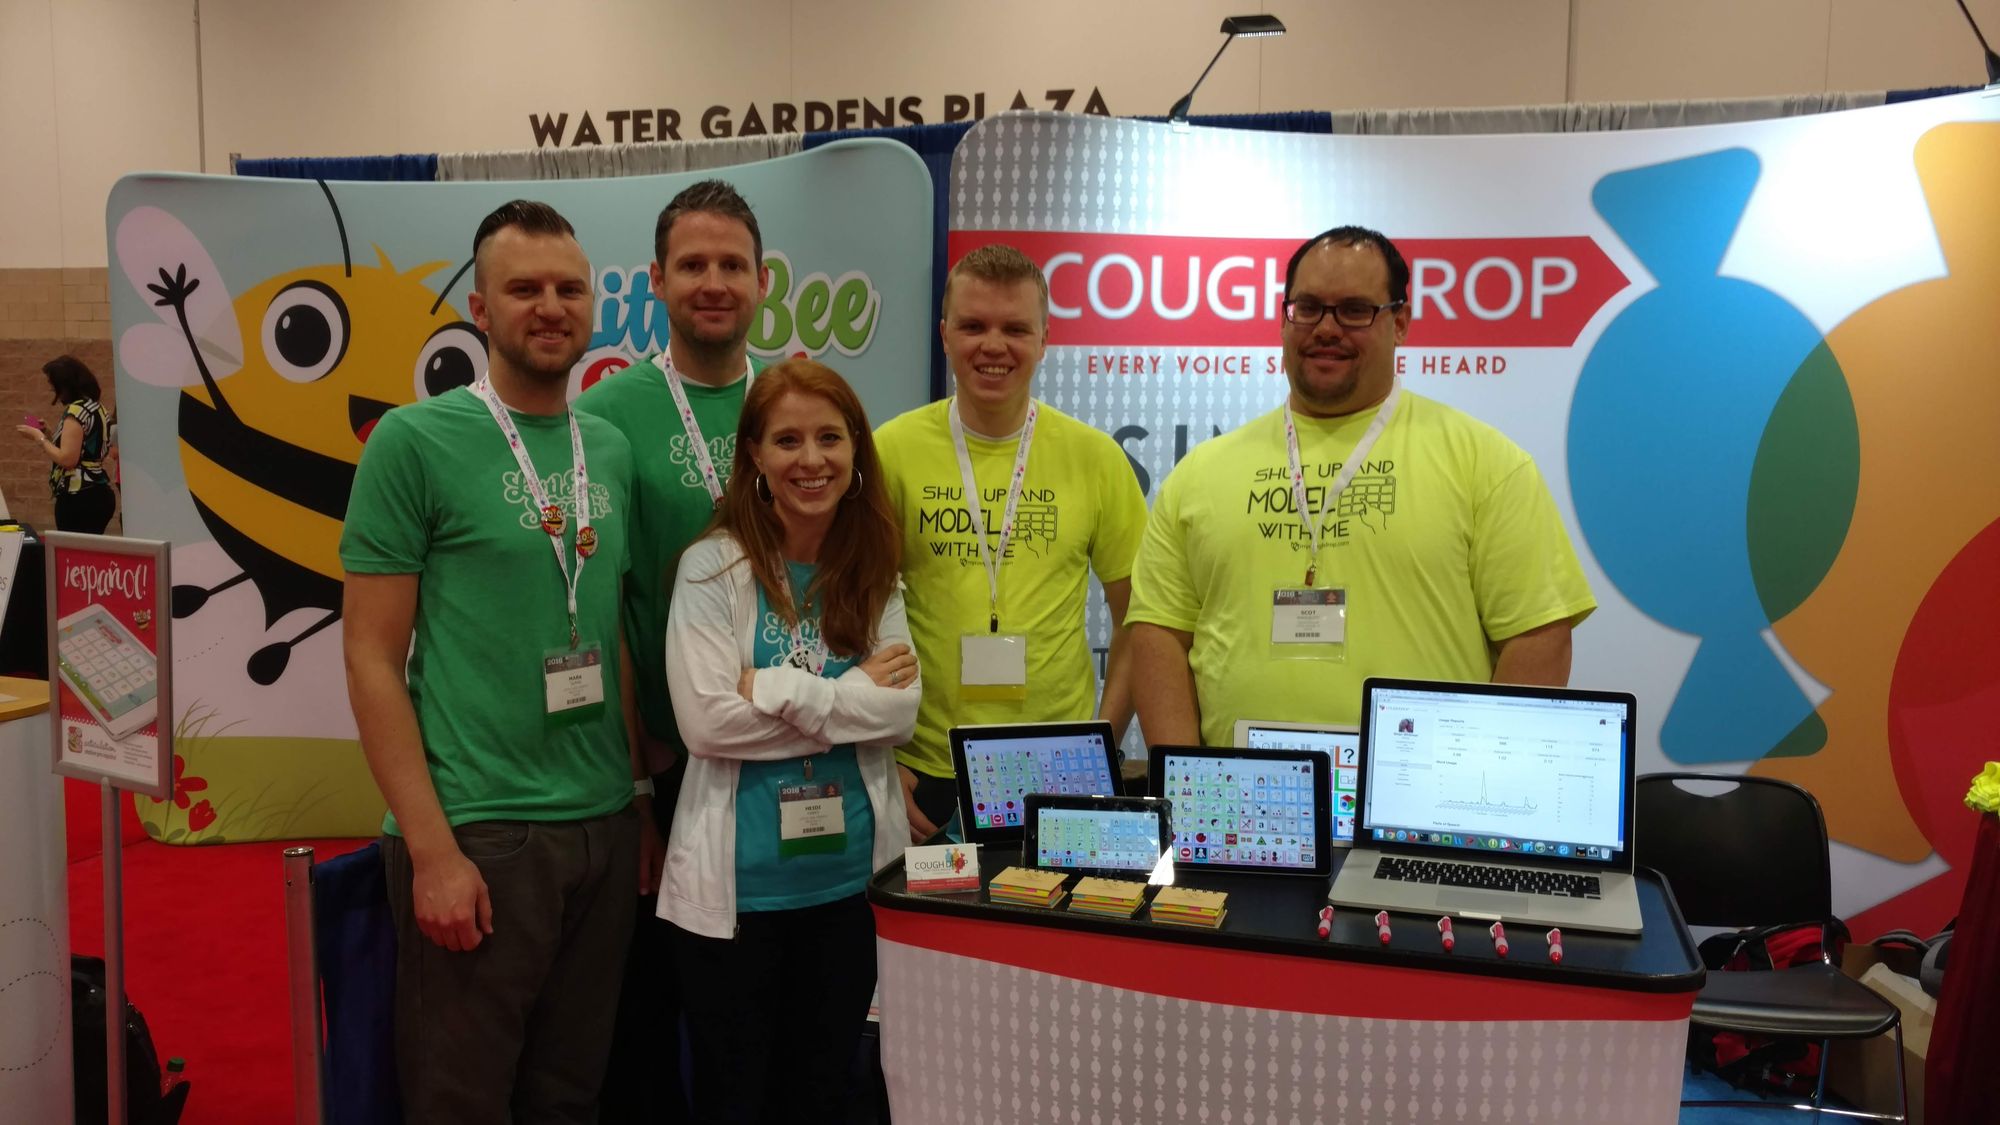 Brian Whitmer & Scot Wahlquist with other conference attendees in front of the CoughDrop booth.